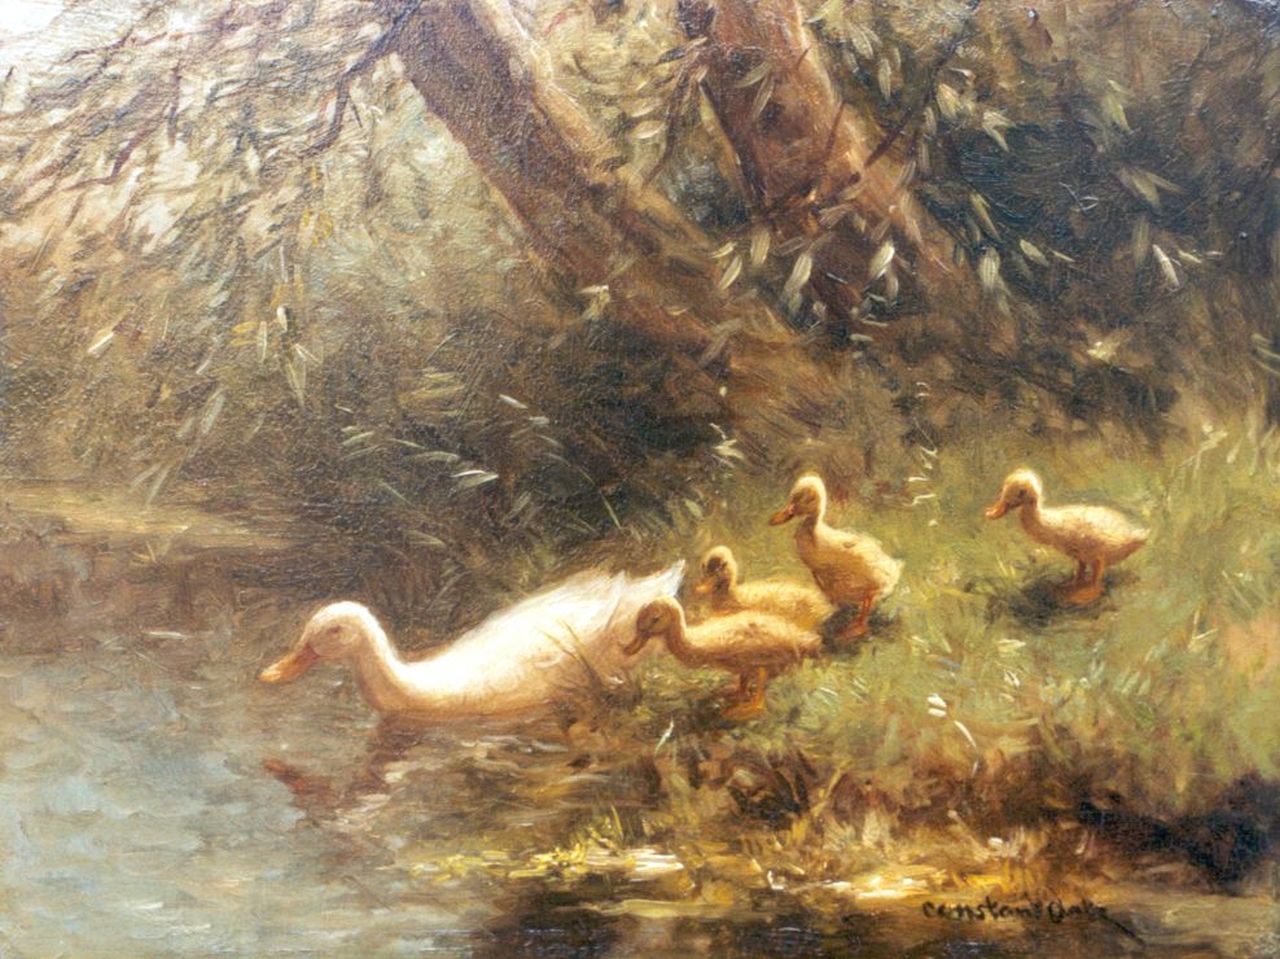 Artz C.D.L.  | 'Constant' David Ludovic Artz, A hen and ducklings watering, oil on panel 18.0 x 24.0 cm, signed l.r.